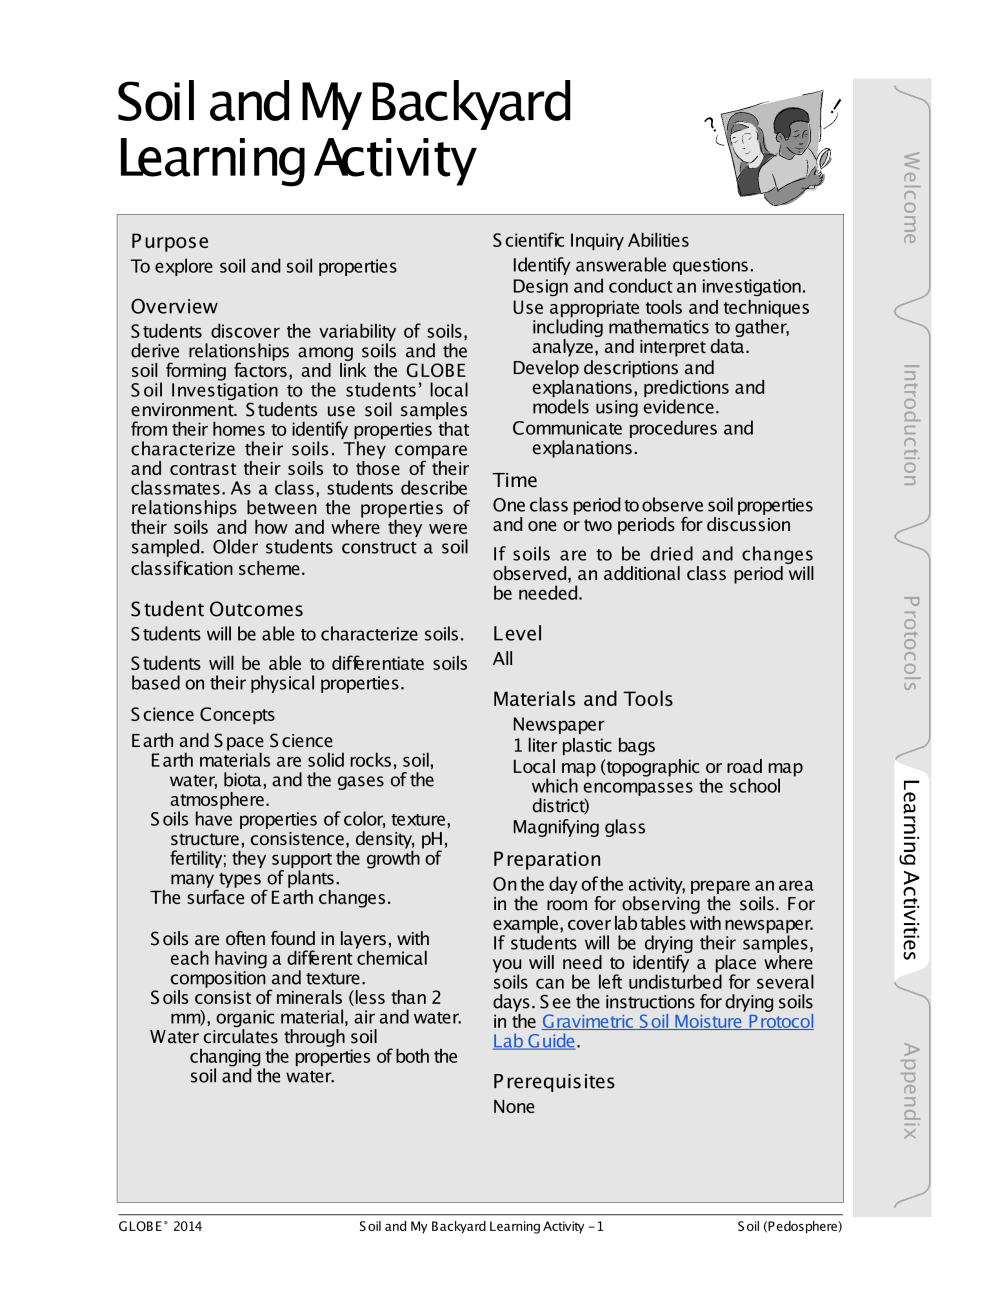 Learning Activities preview for Soil and My Backyard